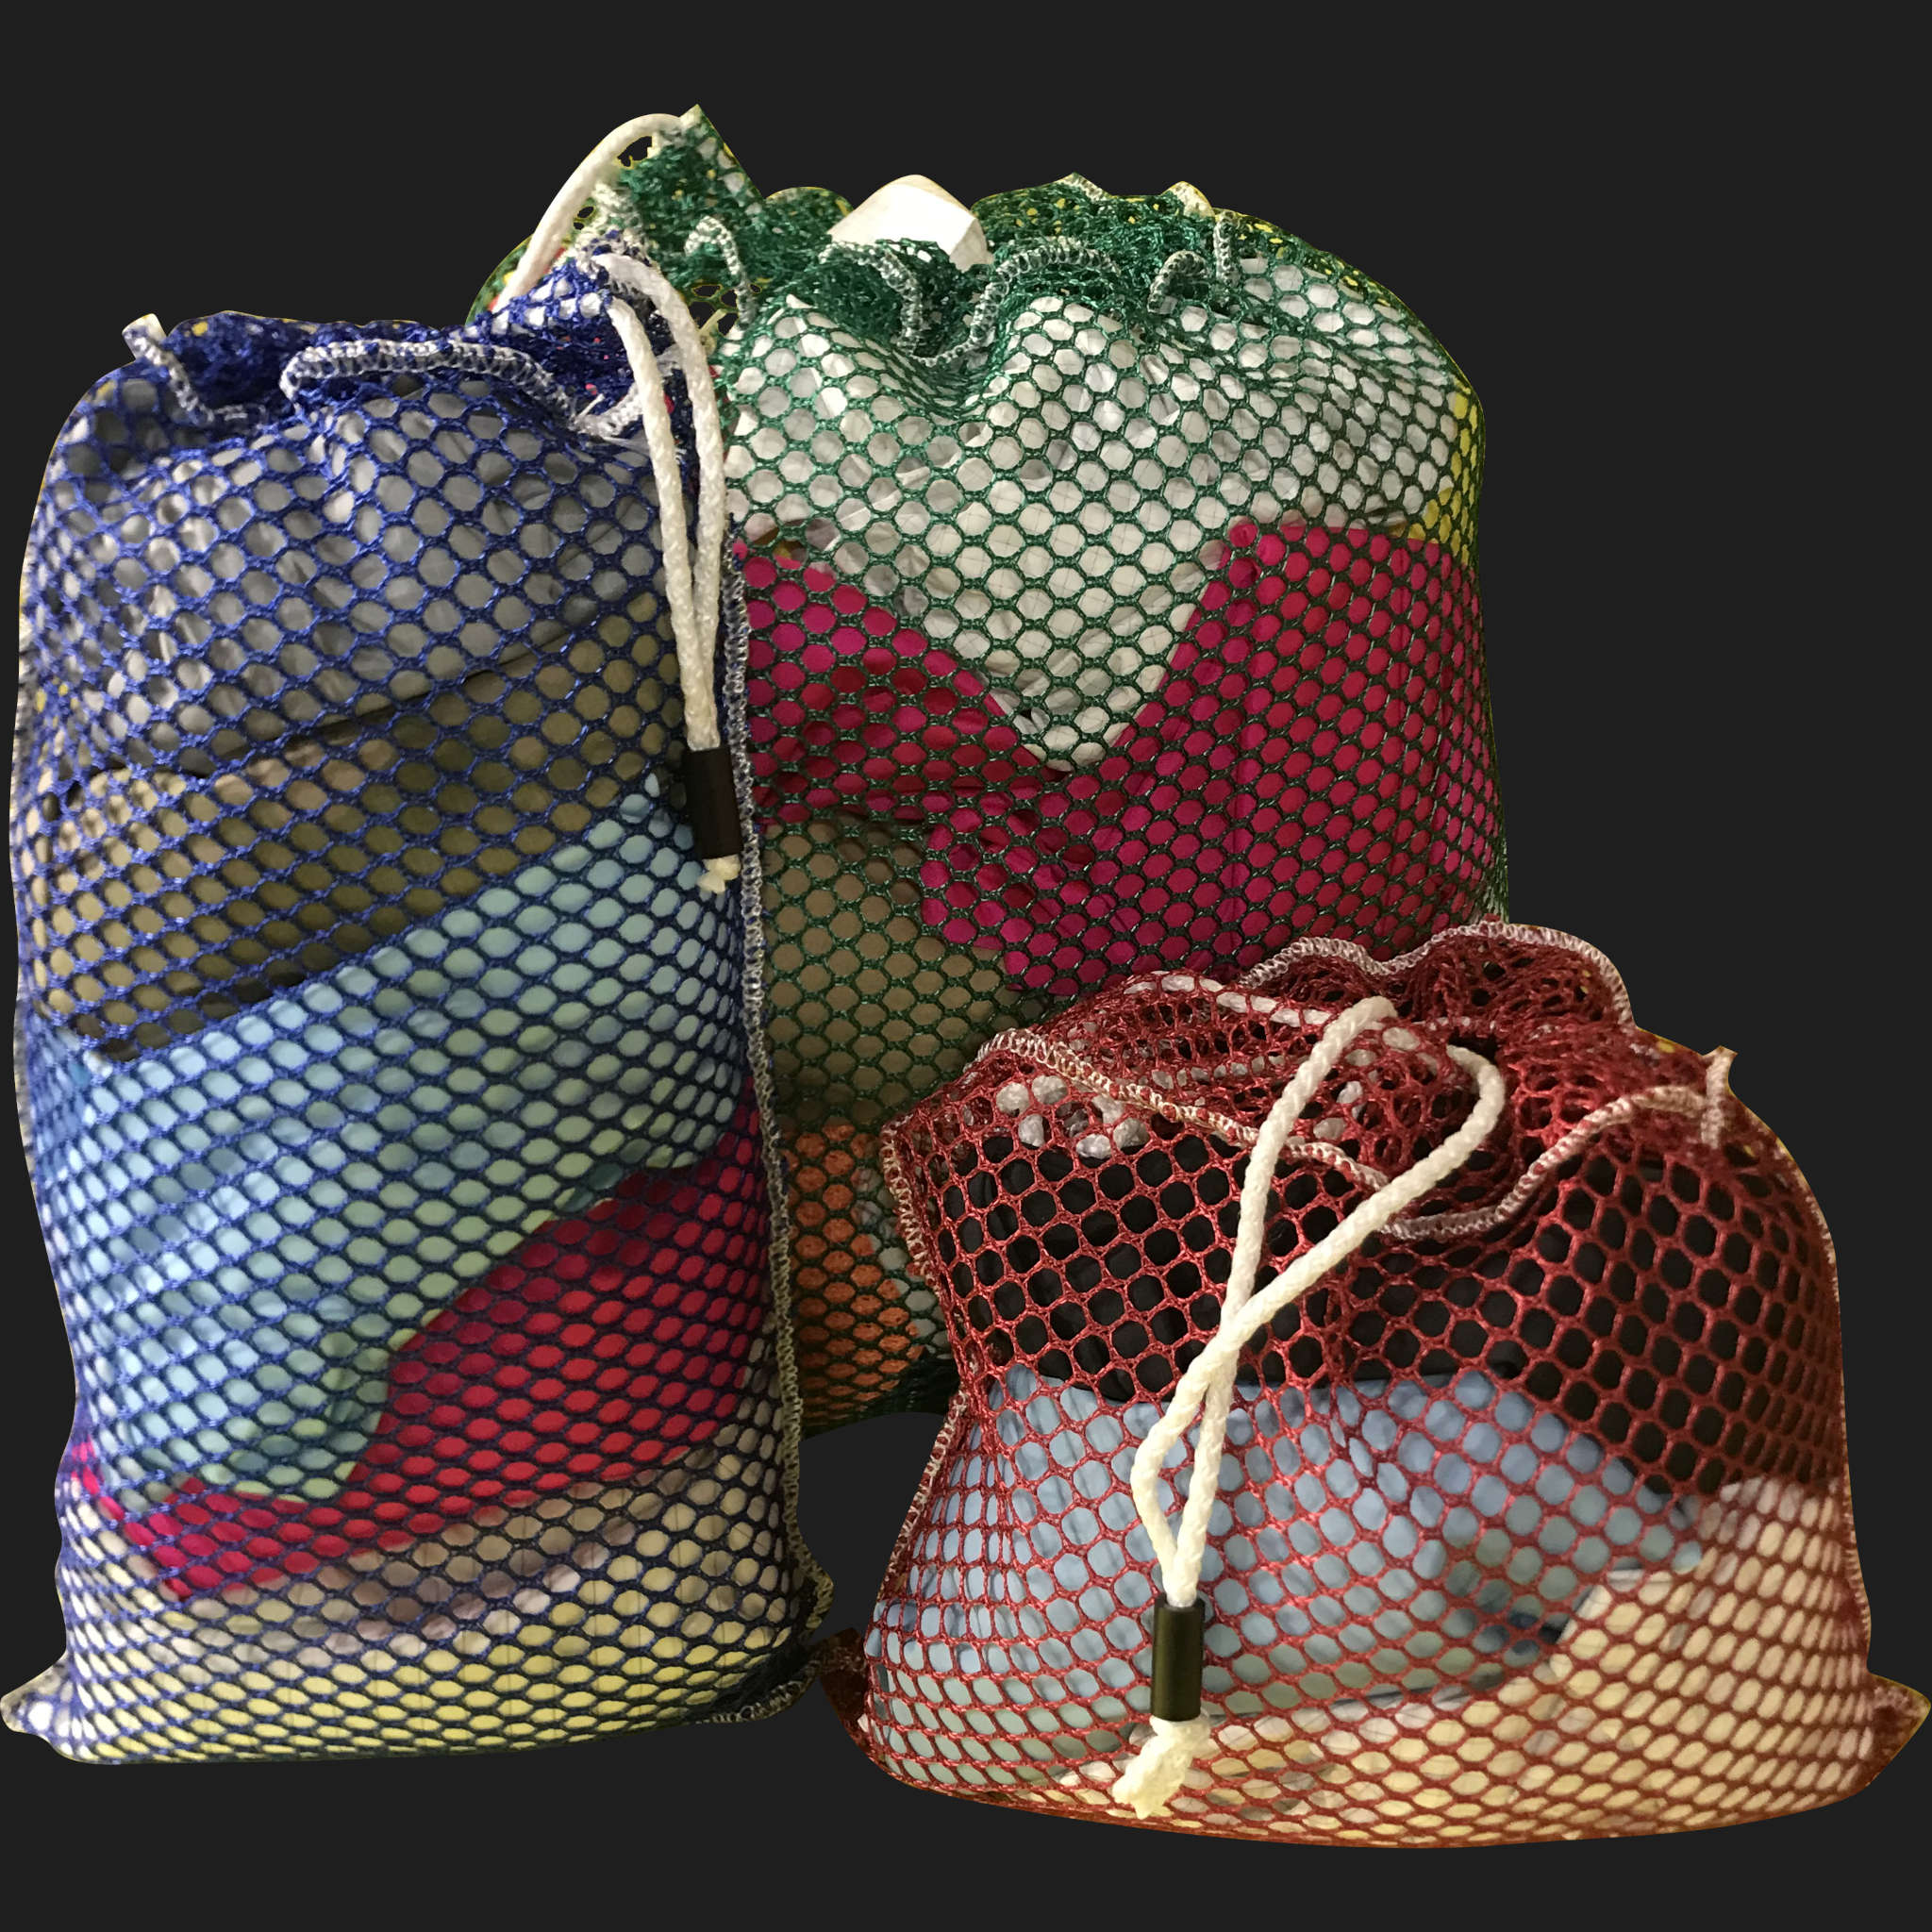 28" x 50" Customized Mesh-Net-Laundry Bags Heavy Duty with Cord and barrellock closure